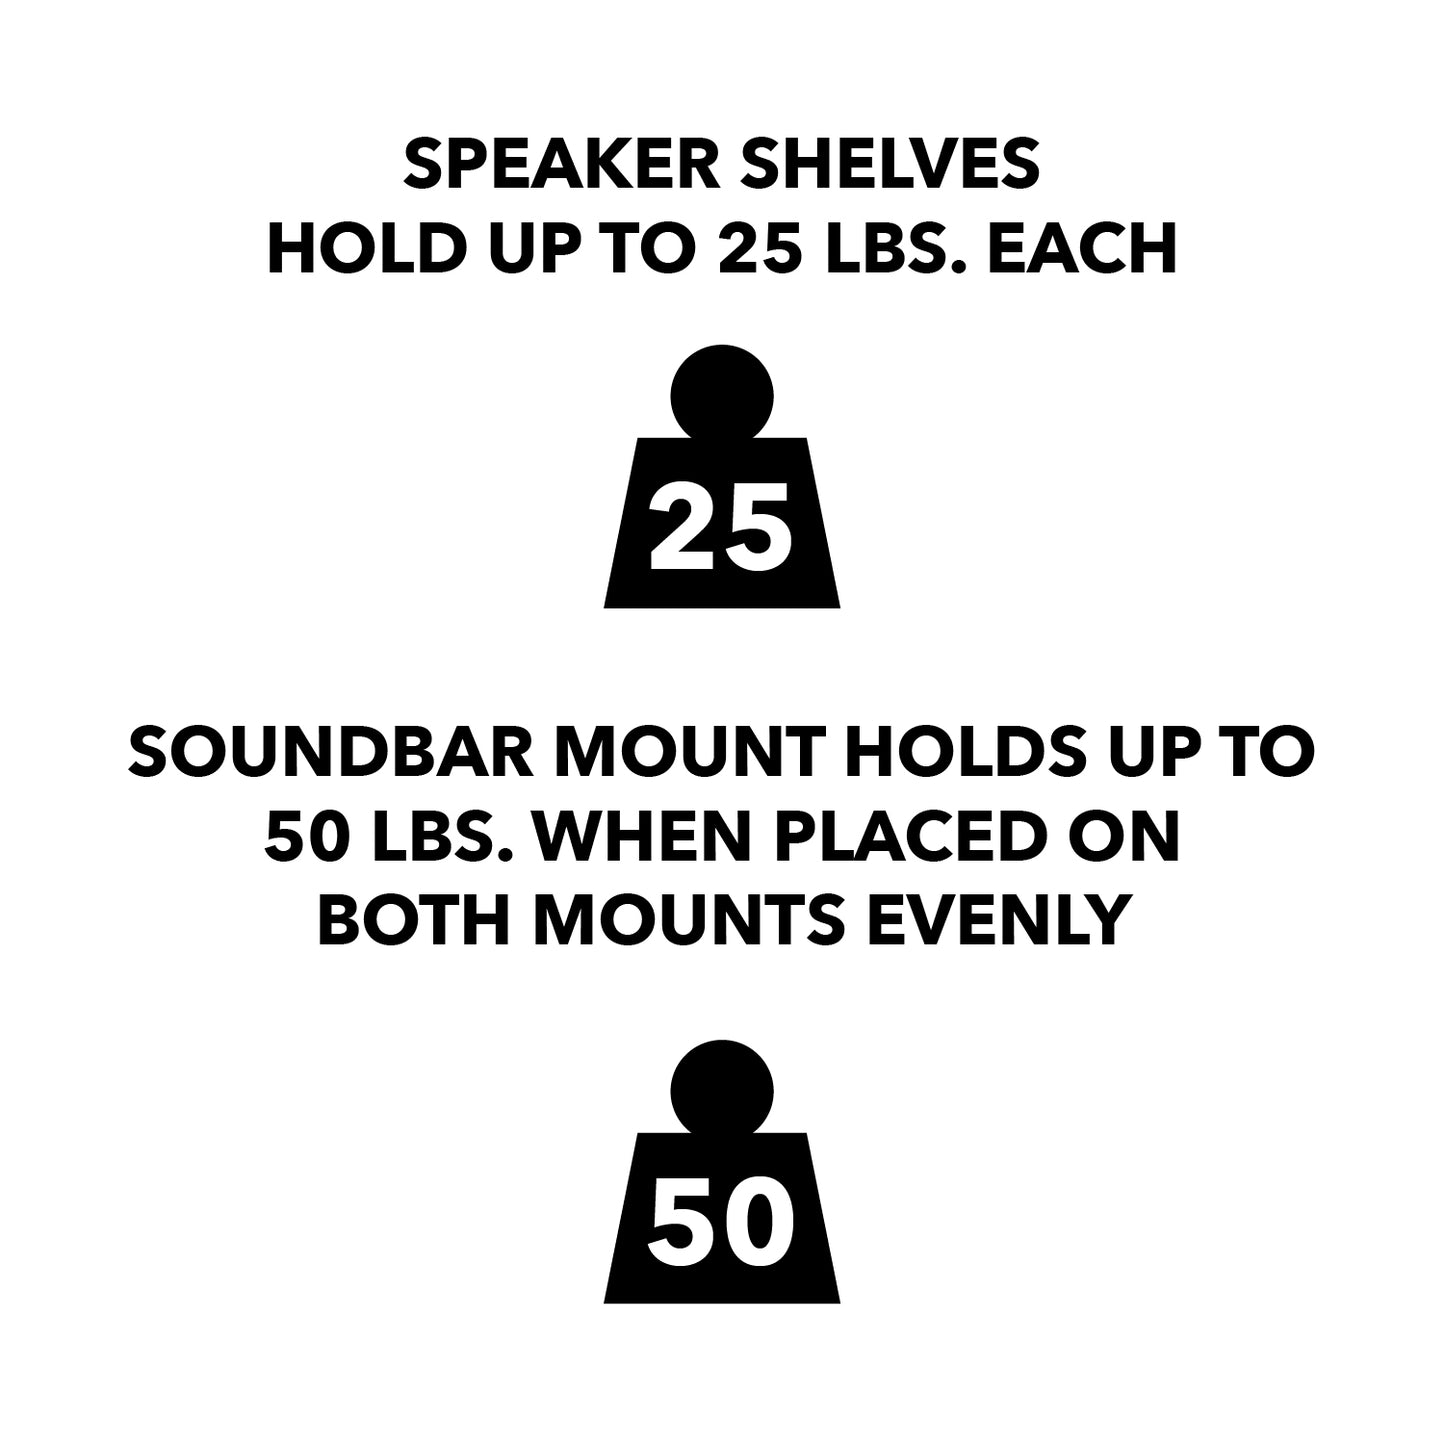 image with text demonstrating that speaker shelves up to 25 lbs each and the soundbar mount that holds up to 50 lbs